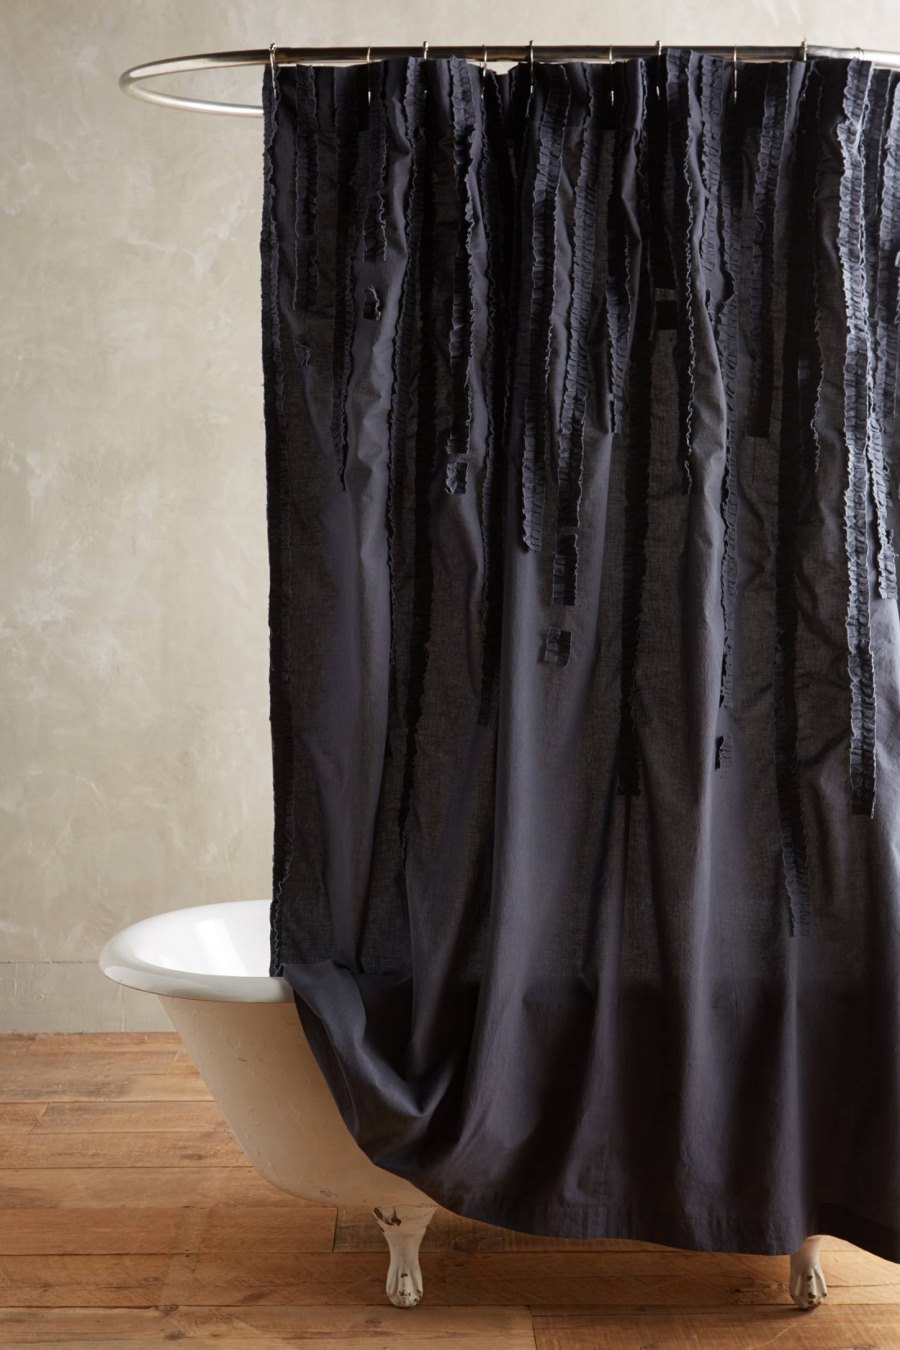 Cotton shower curtain from Anthropologie